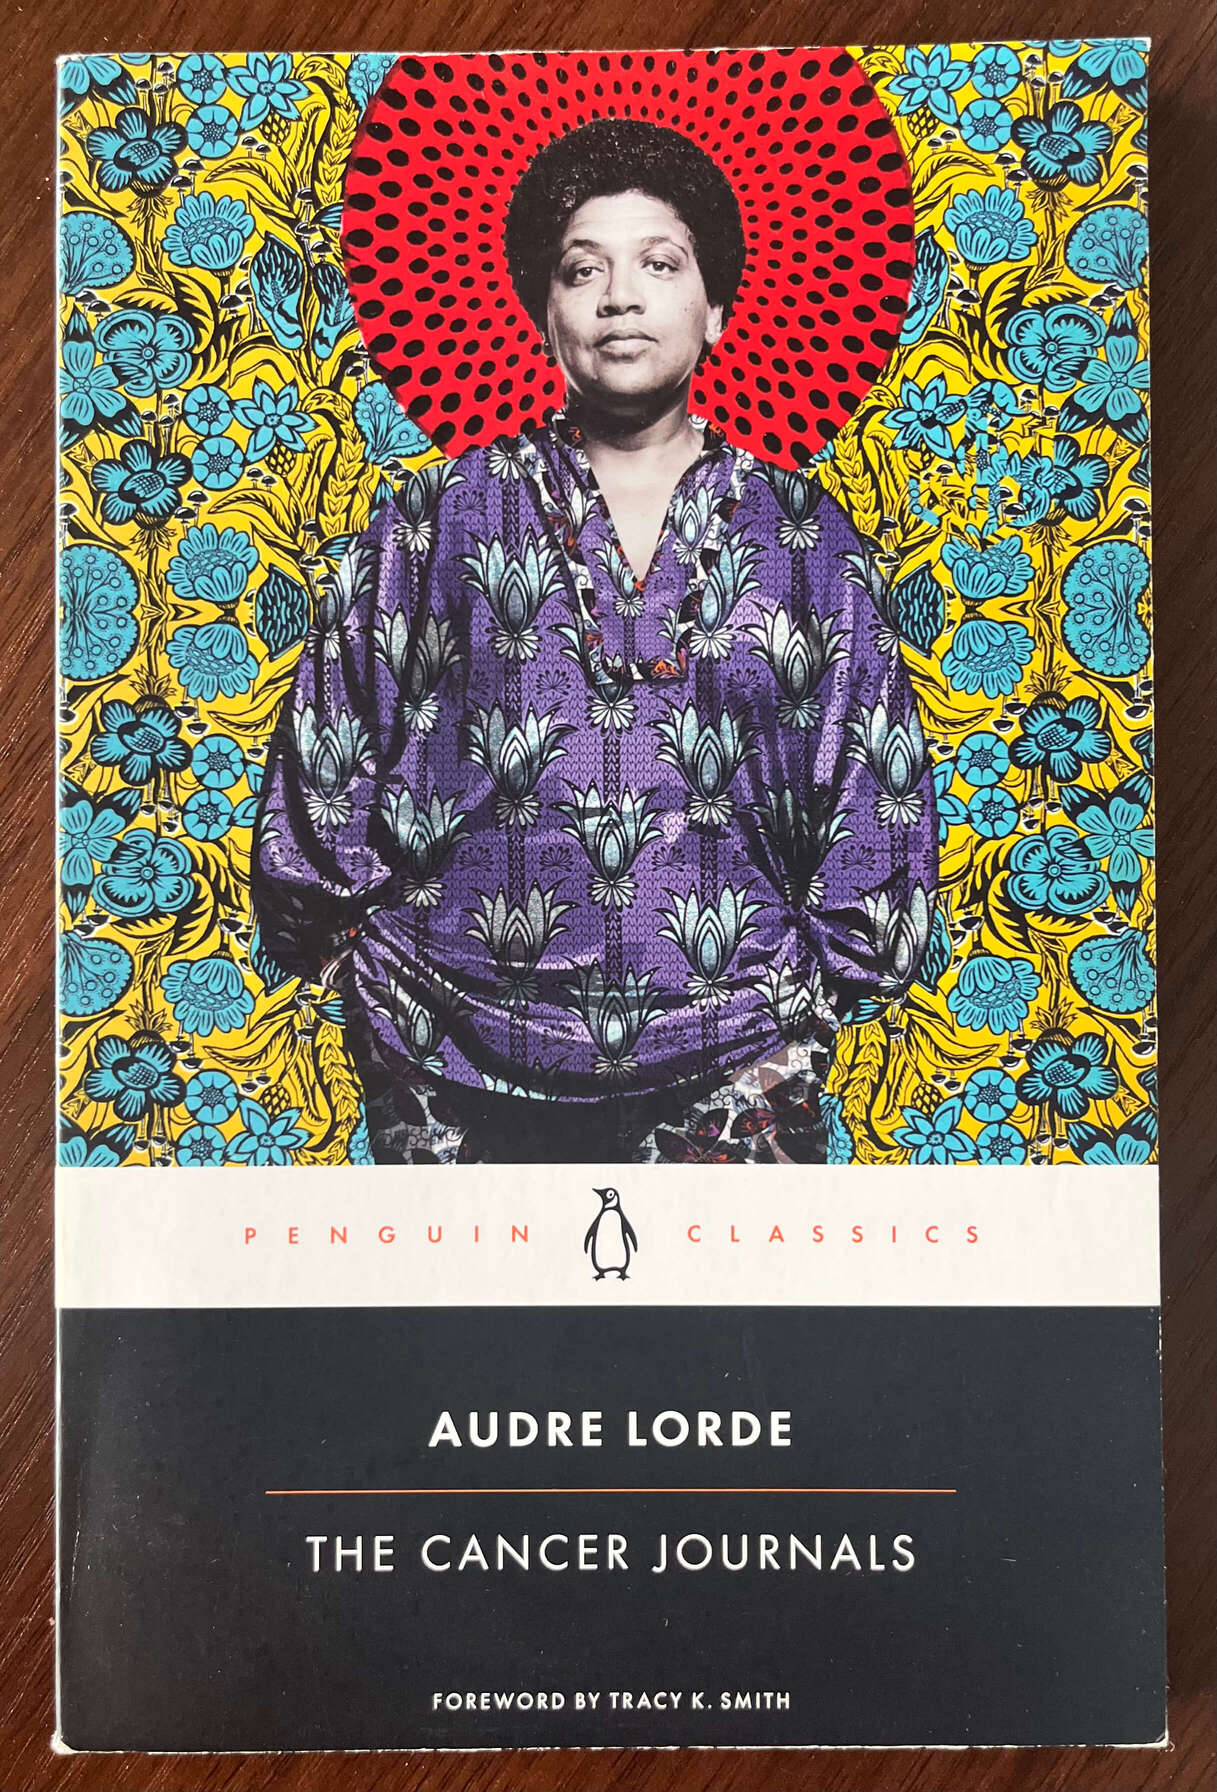 “The Cancer Journals” by Audre Lorde. Foreword by Tracy K. Smith.